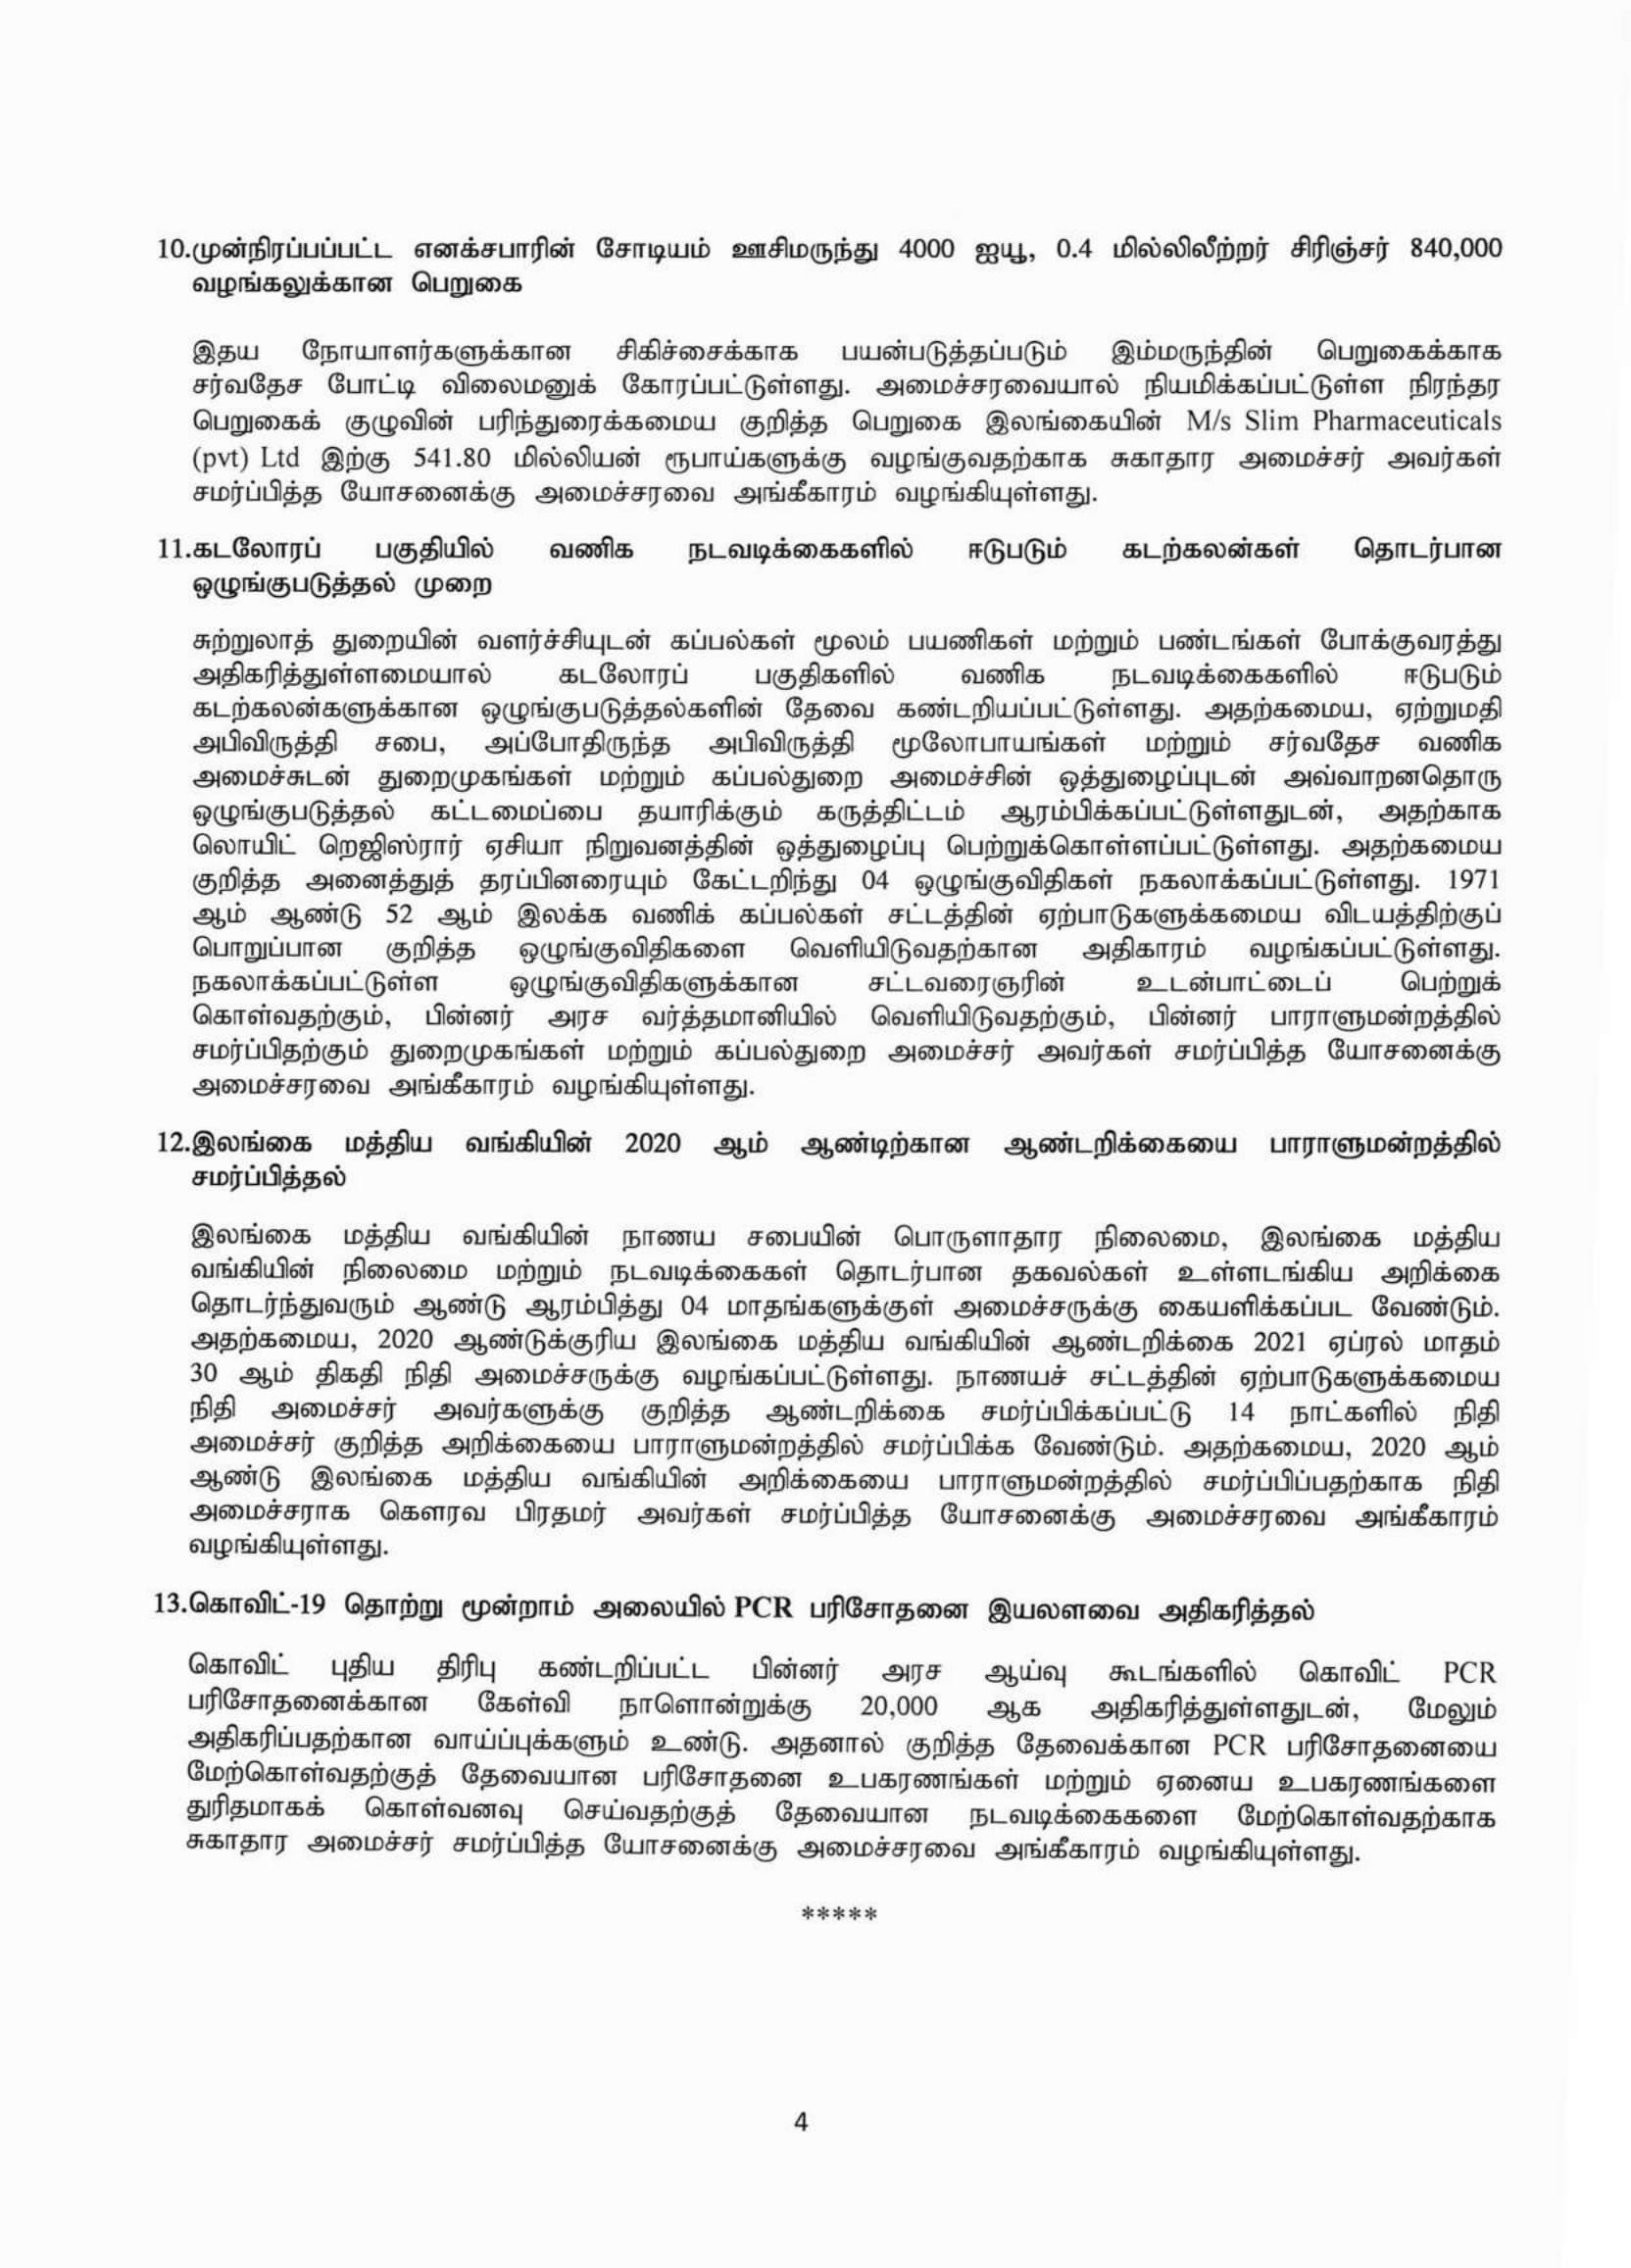 Cabinet Decision on 03.05.2021 Tamil 4